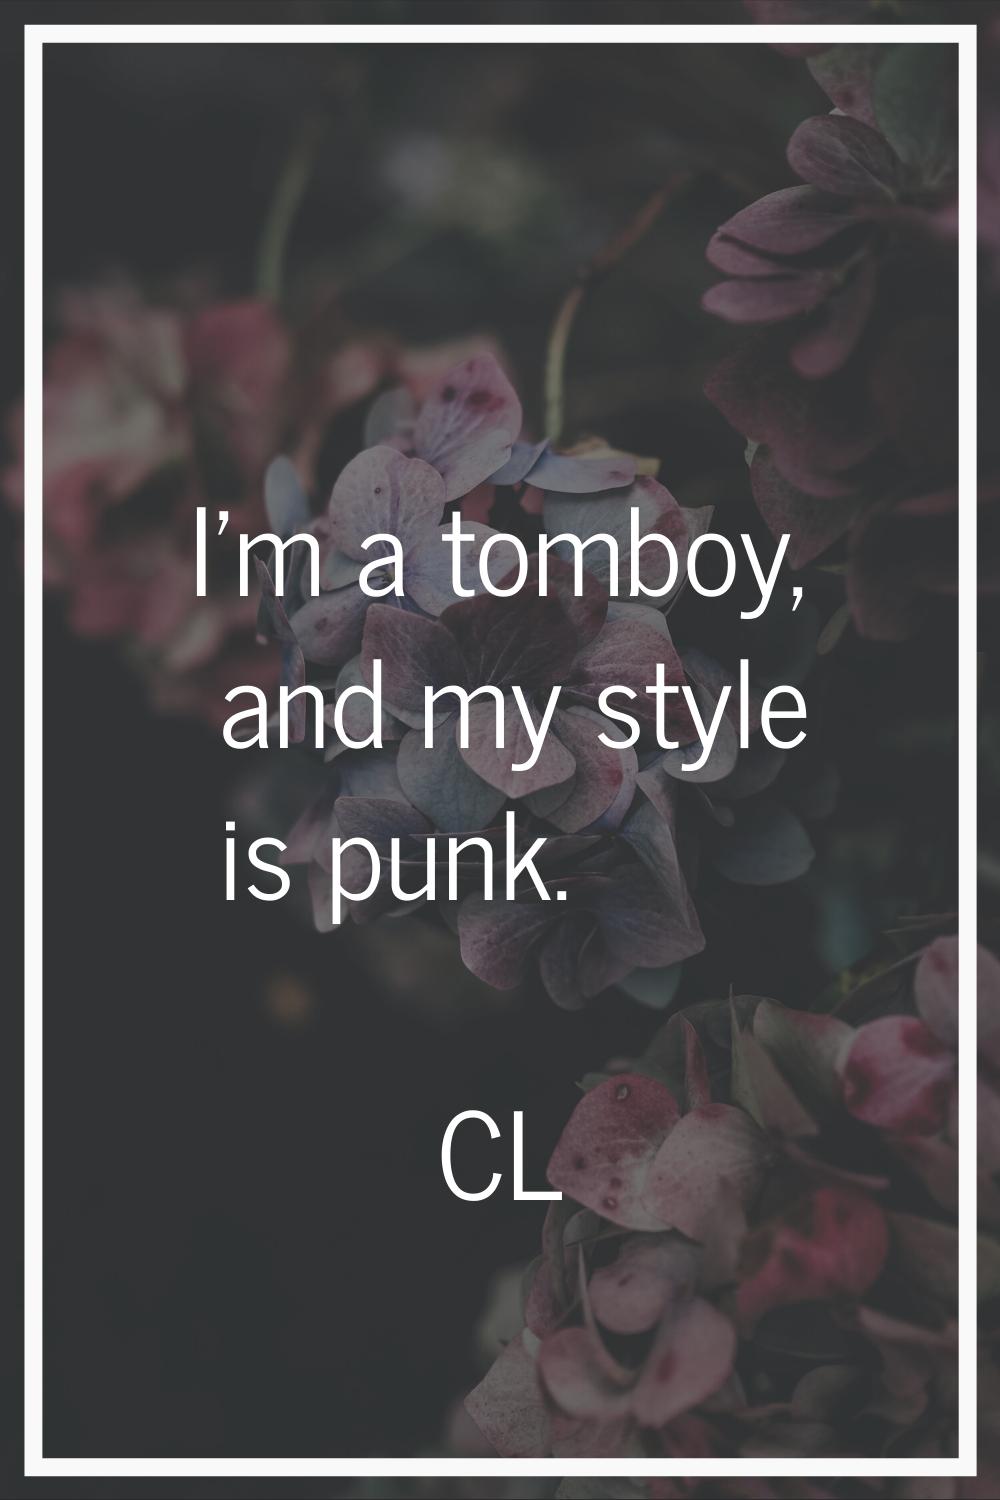 I'm a tomboy, and my style is punk.